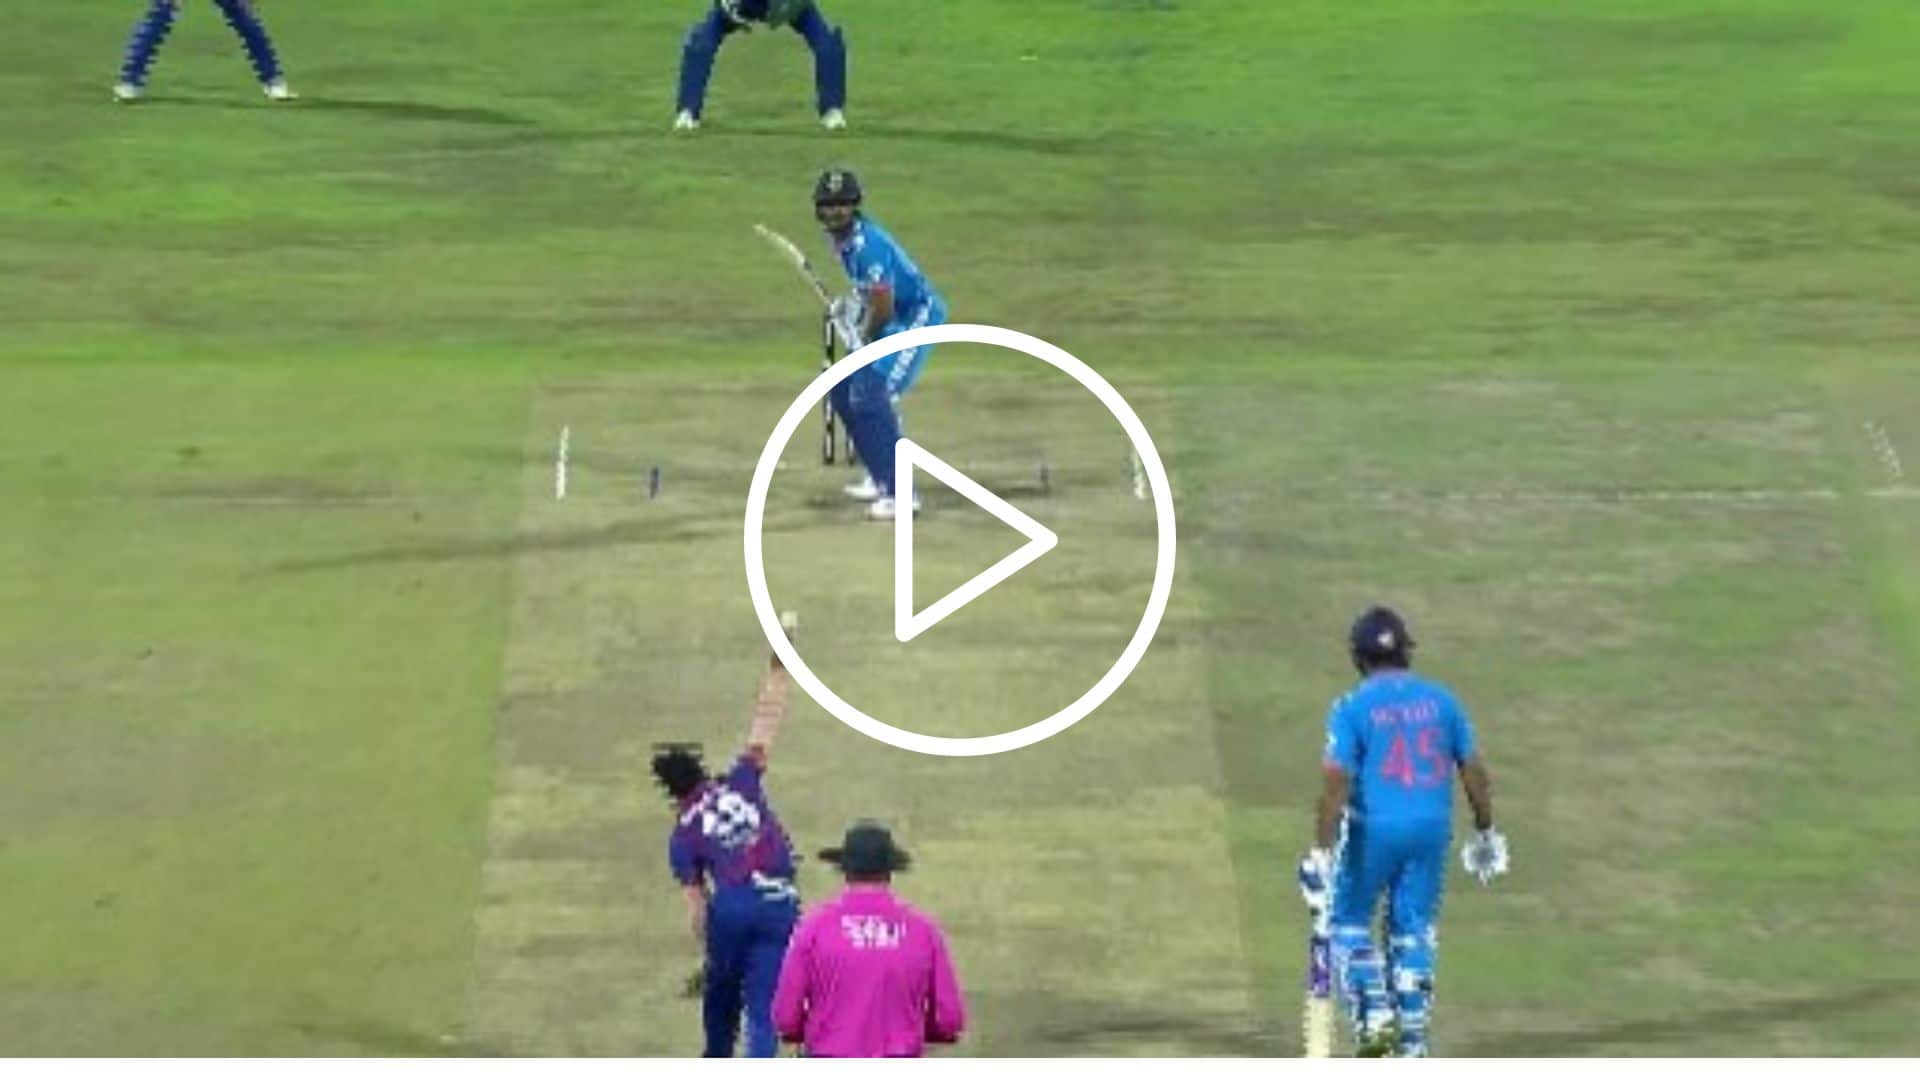 [Watch] Shubman Gill Produces Backfoot Masterclass With Hattrick of Fours vs Nepal